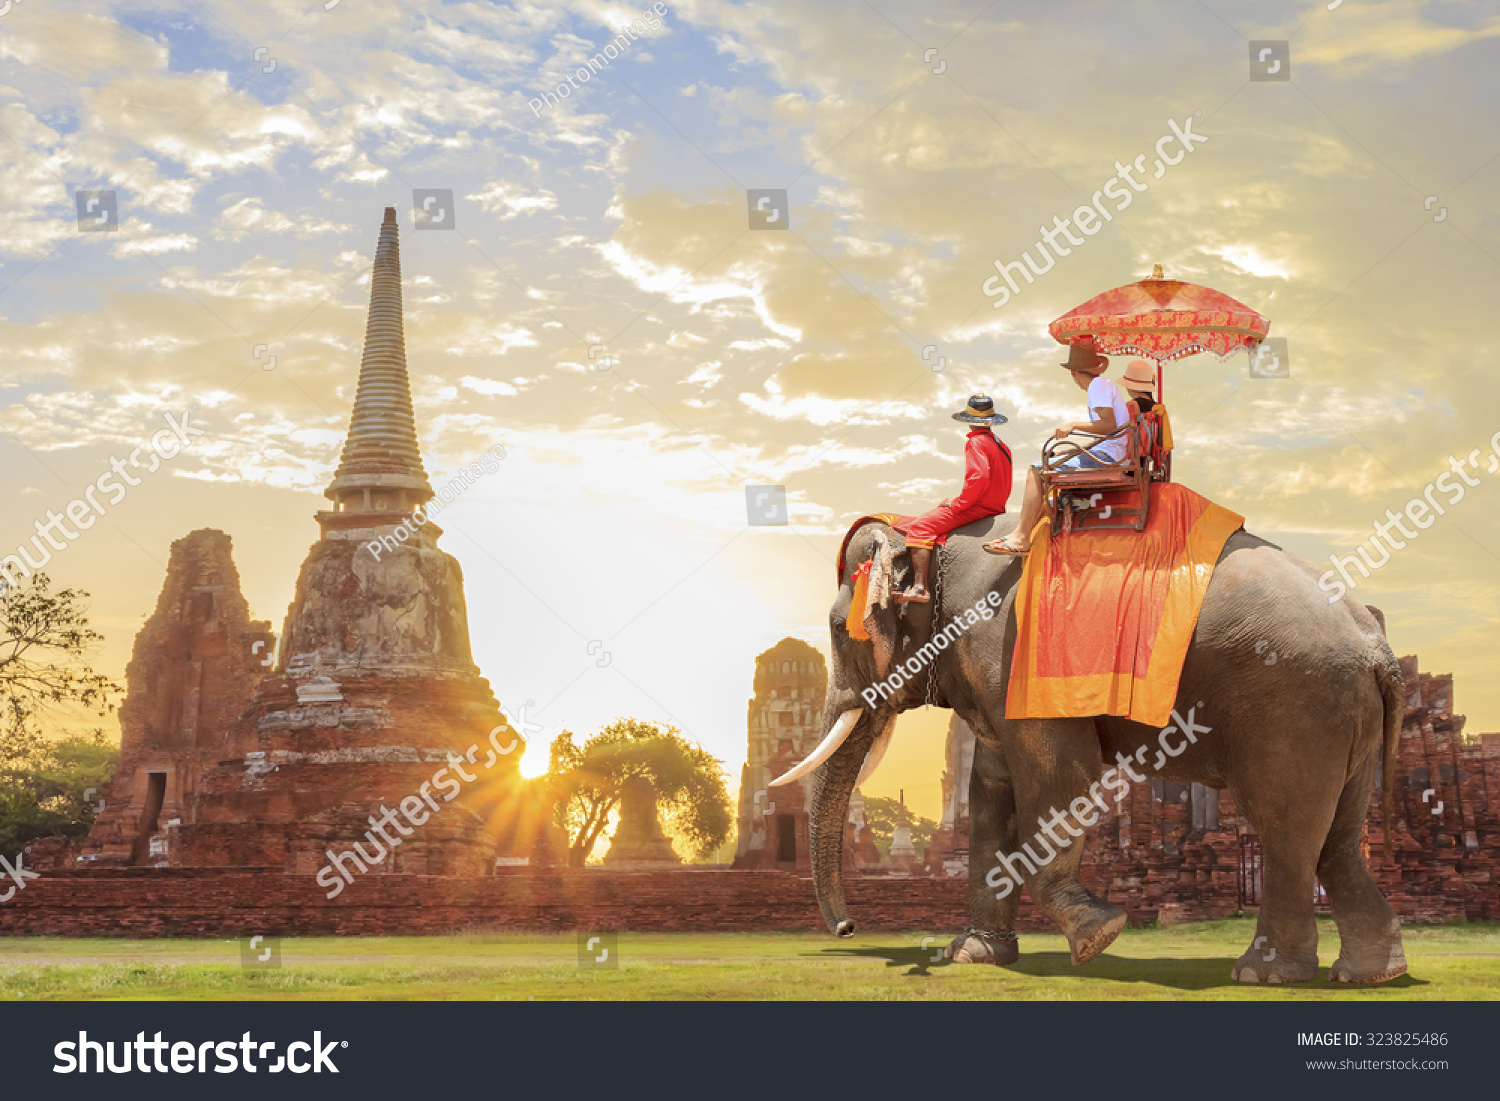  Tourists on an ride elephant tour of the ancient city in sunrise background #323825486